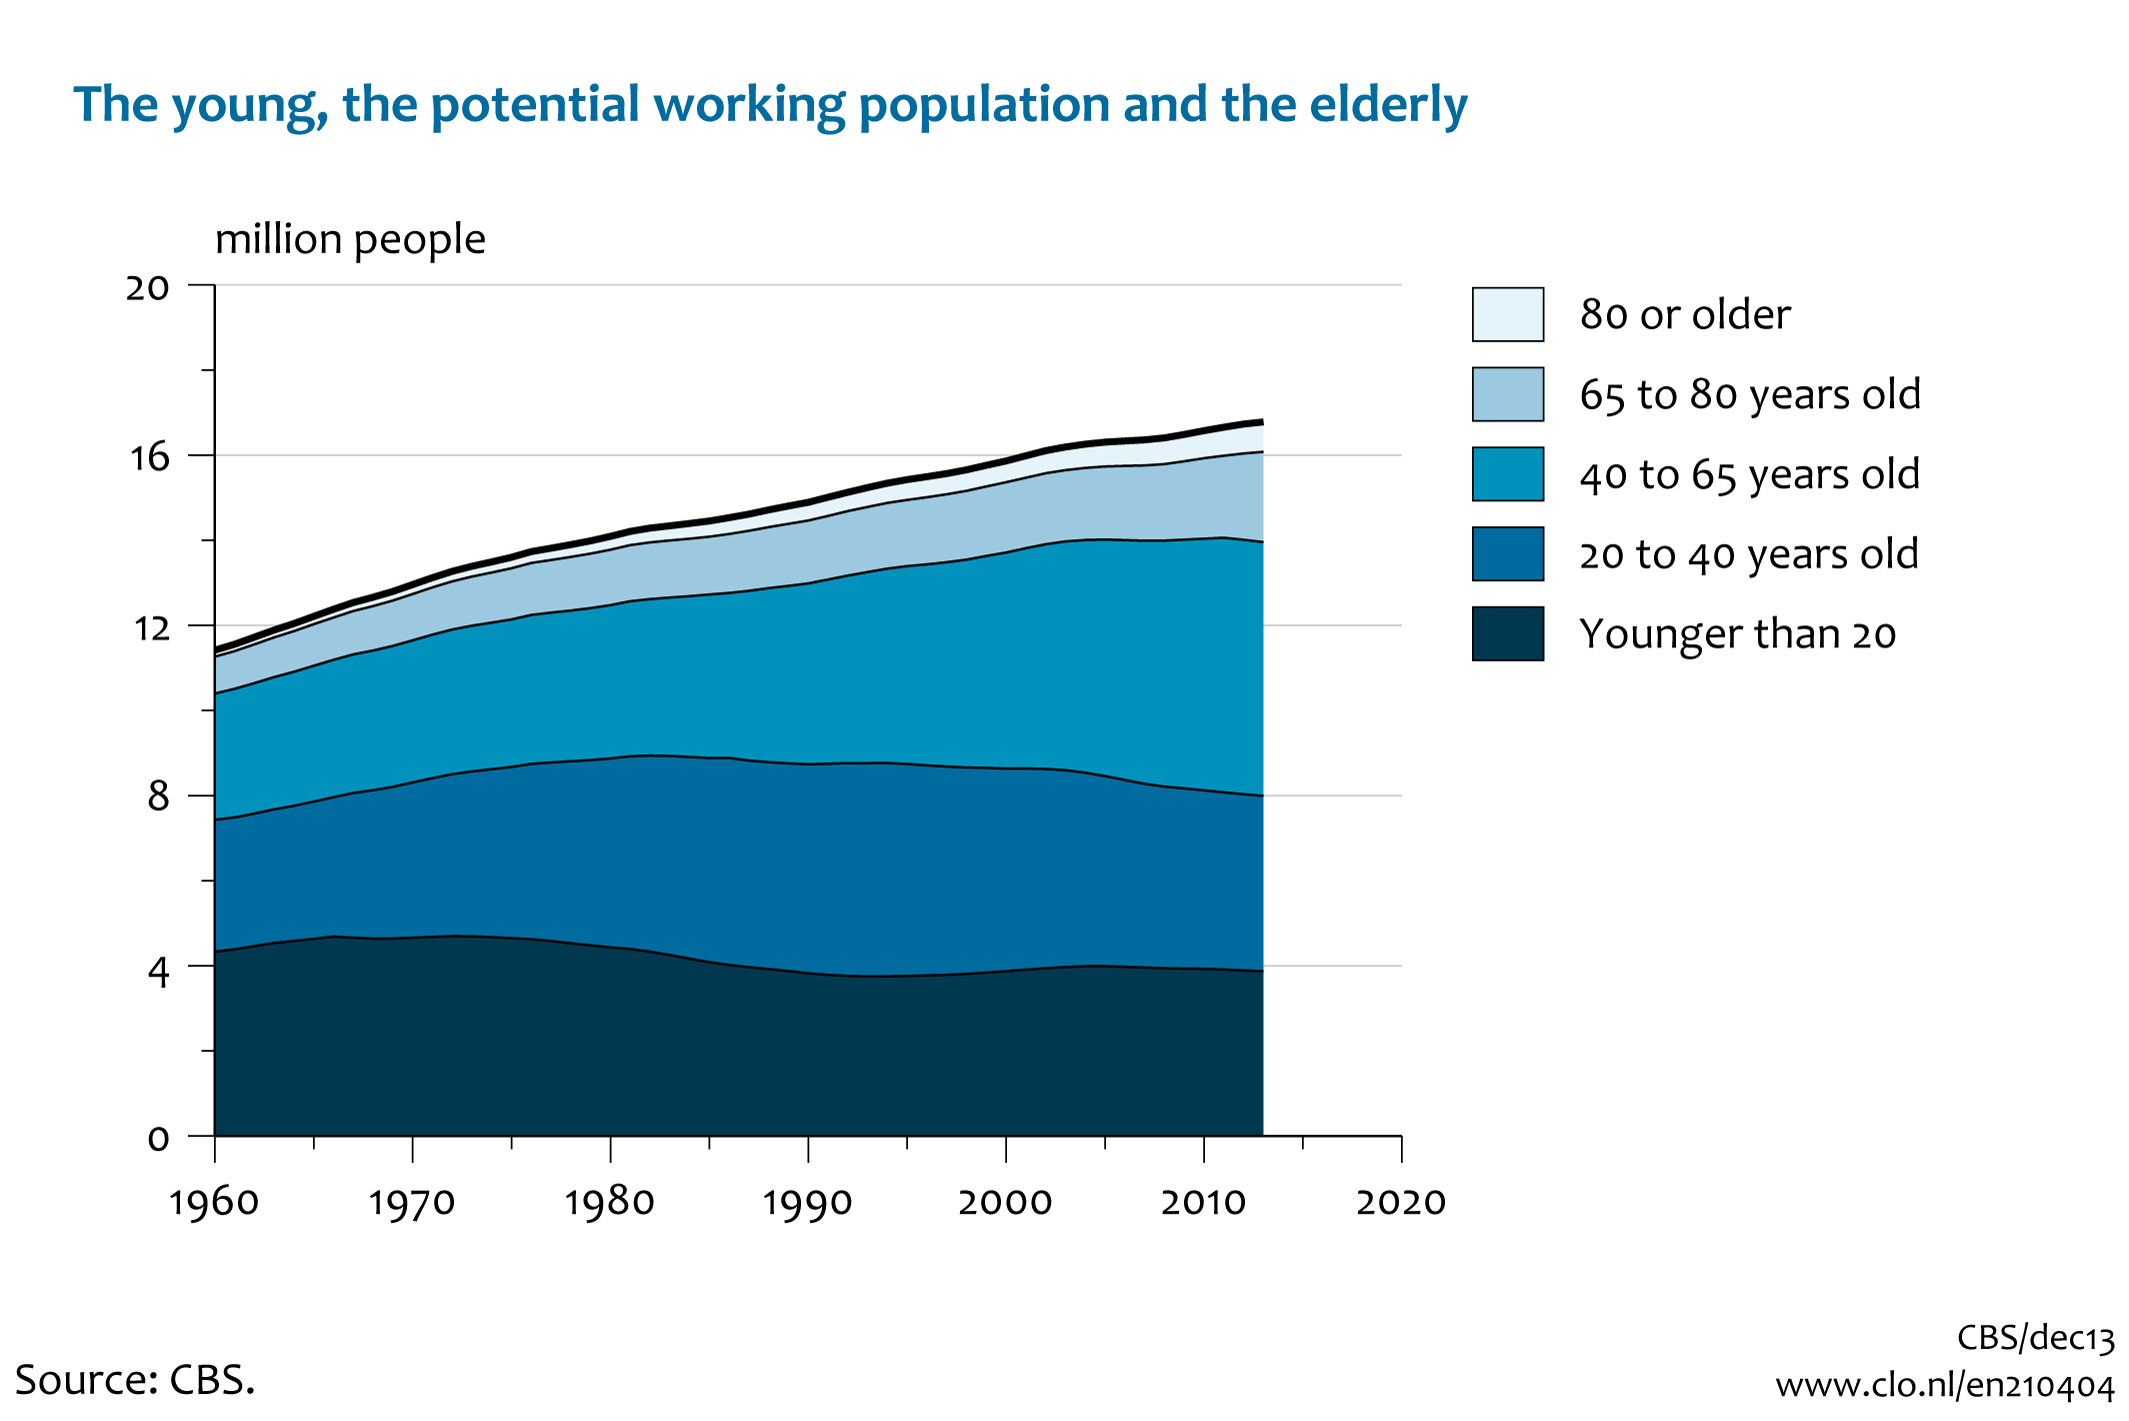 Image The young, potential working population and the elderly. The image is further explained in the text.